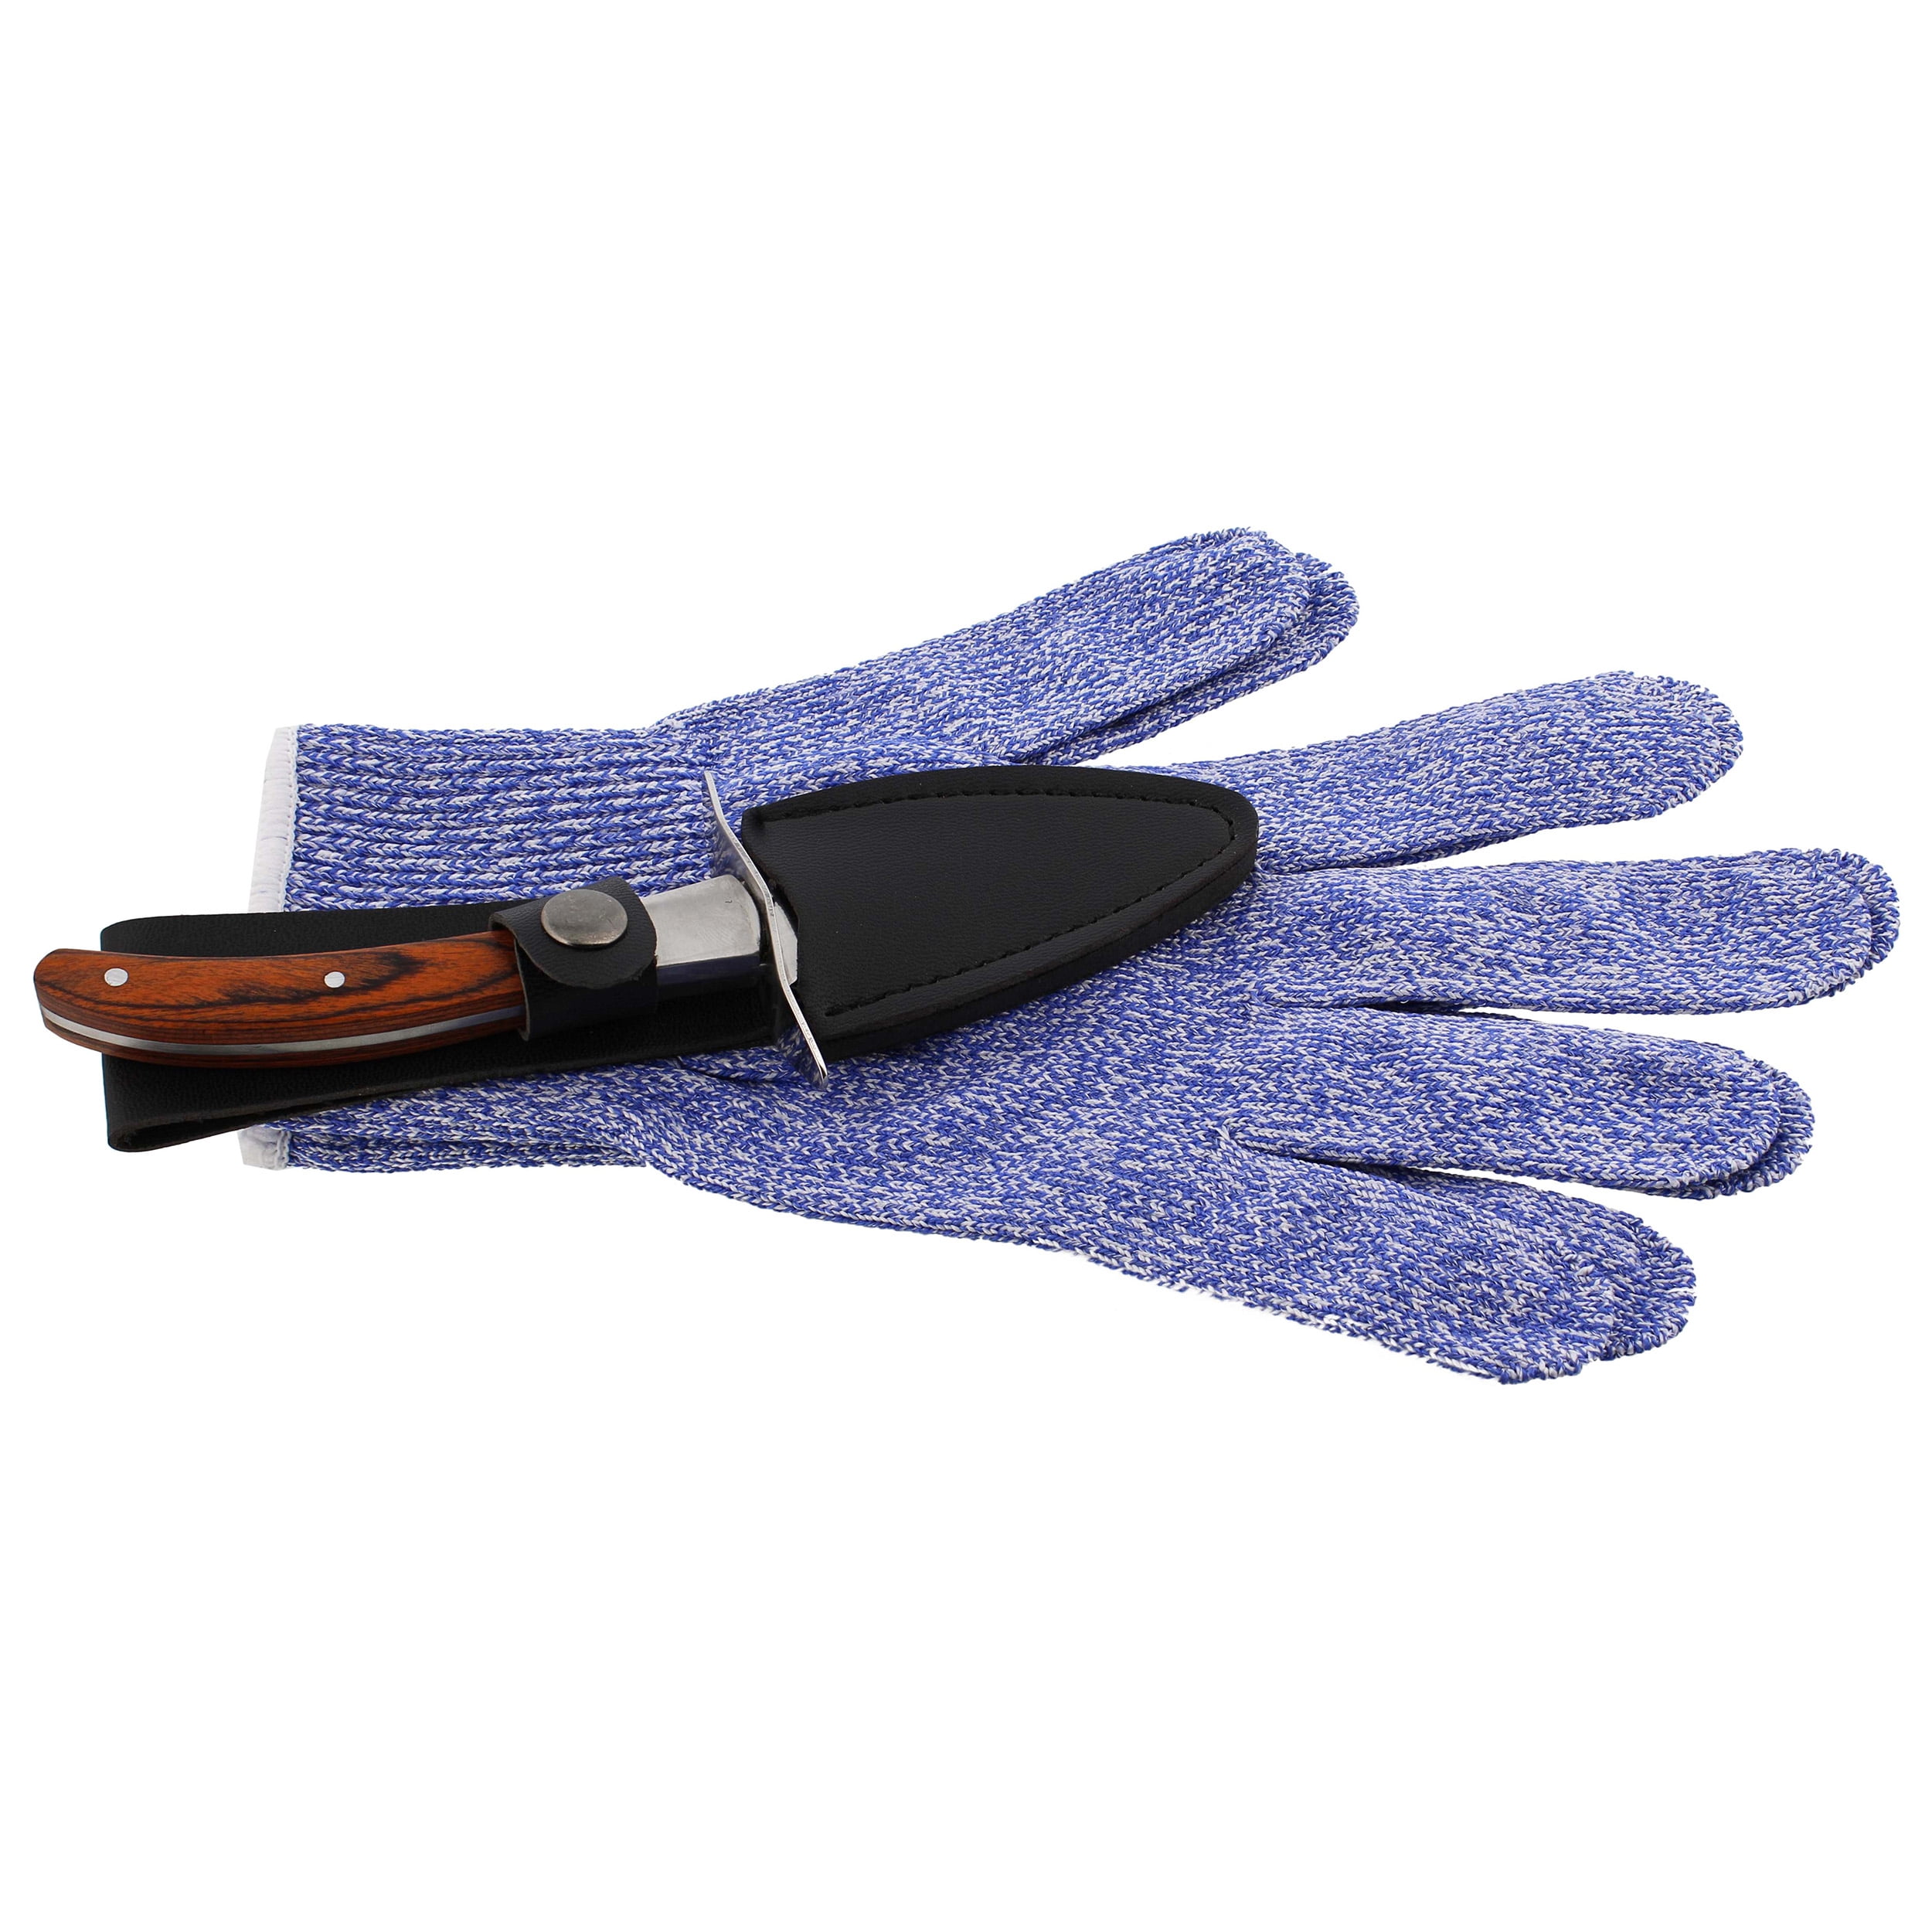 Oyster Shucking Gloves – The Lobster Man